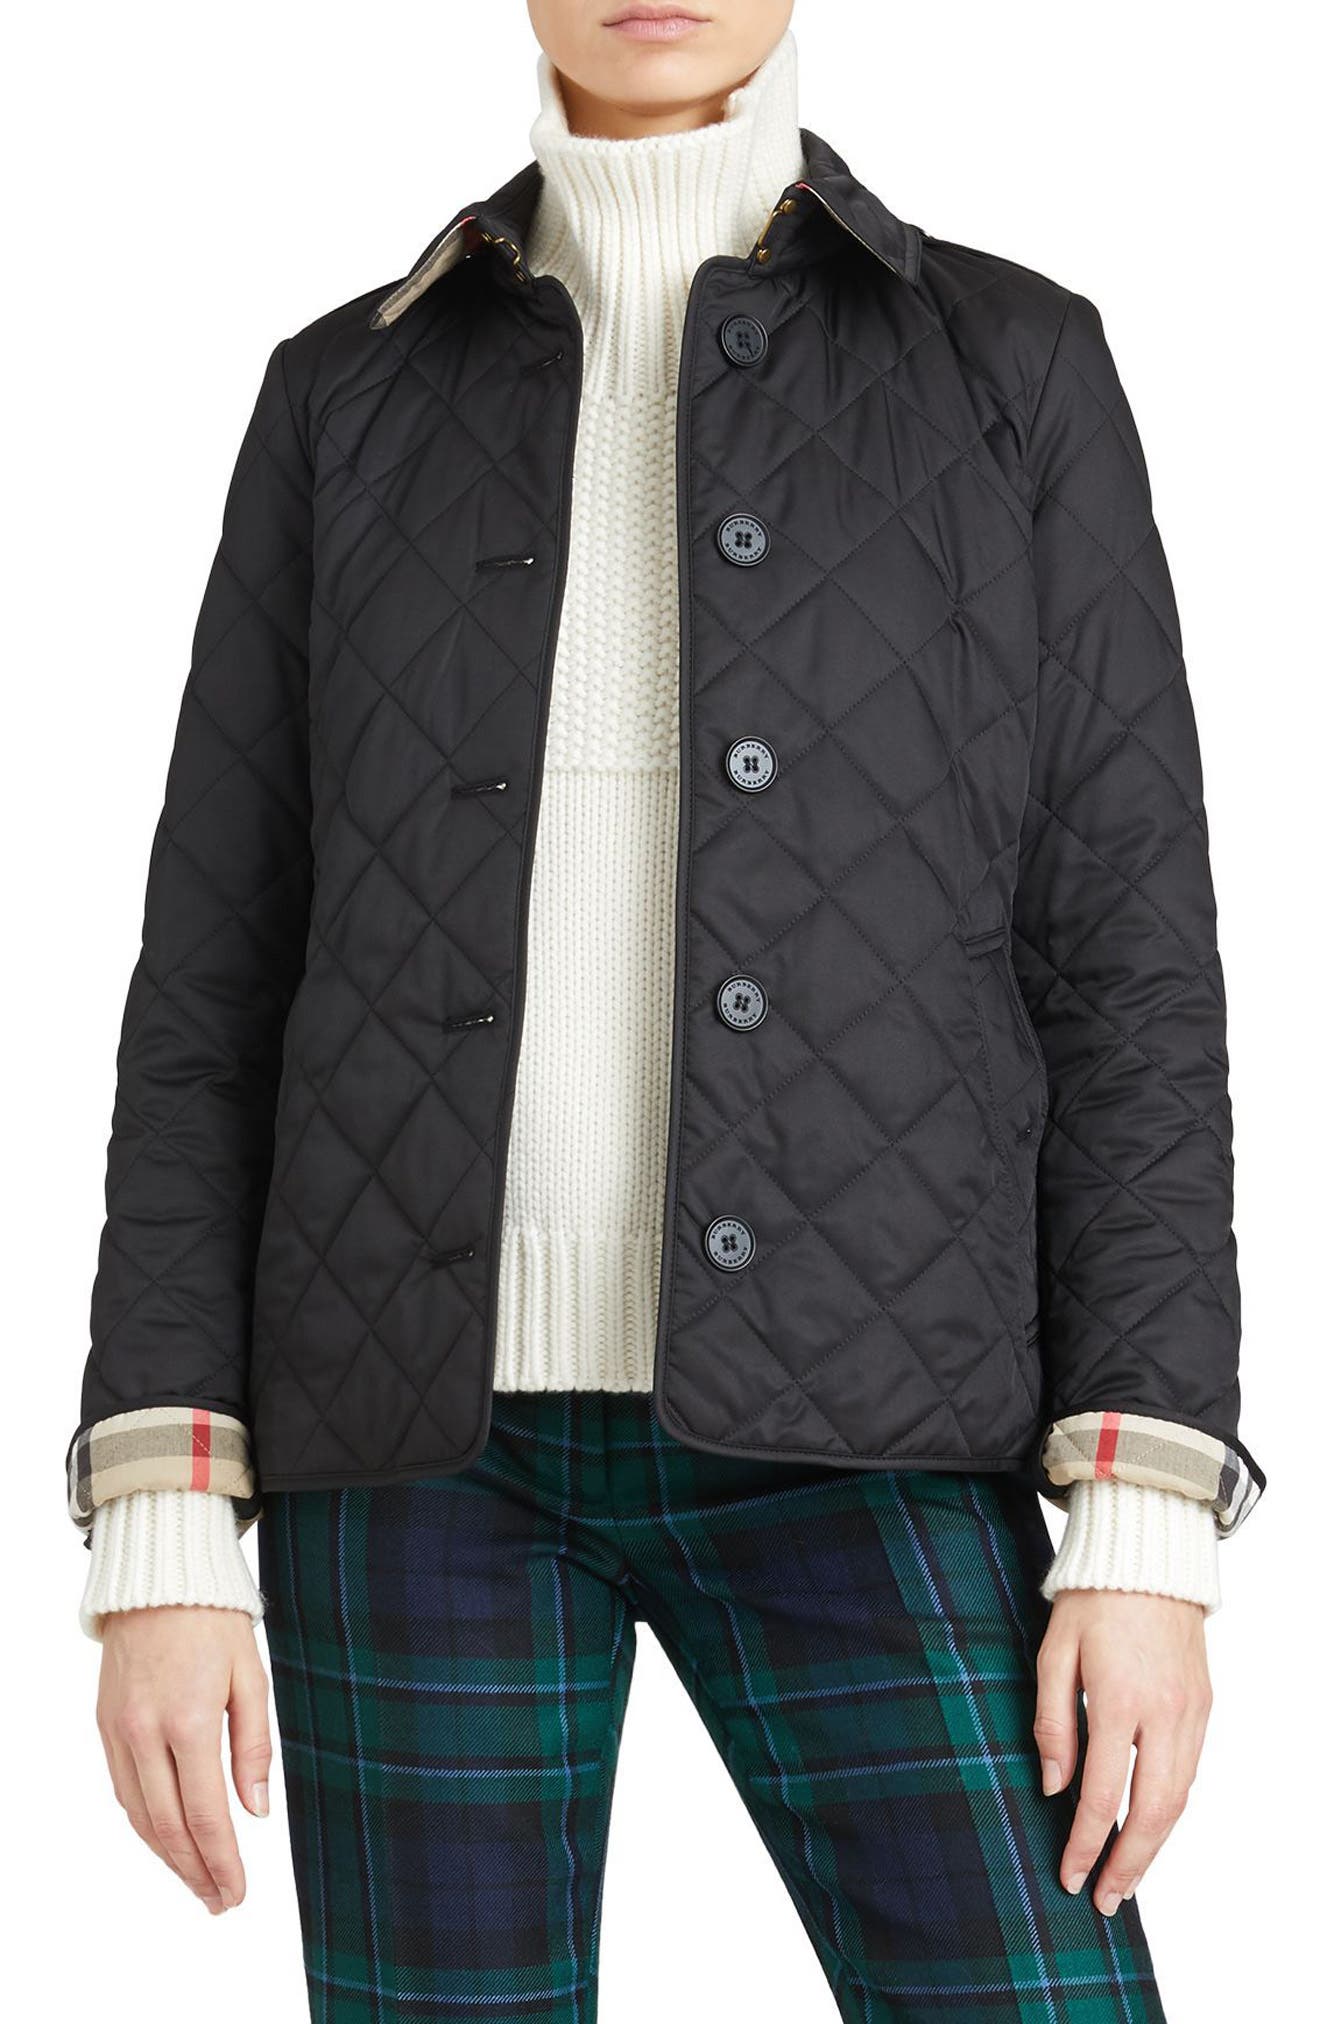 frankby 18 quilted jacket burberry